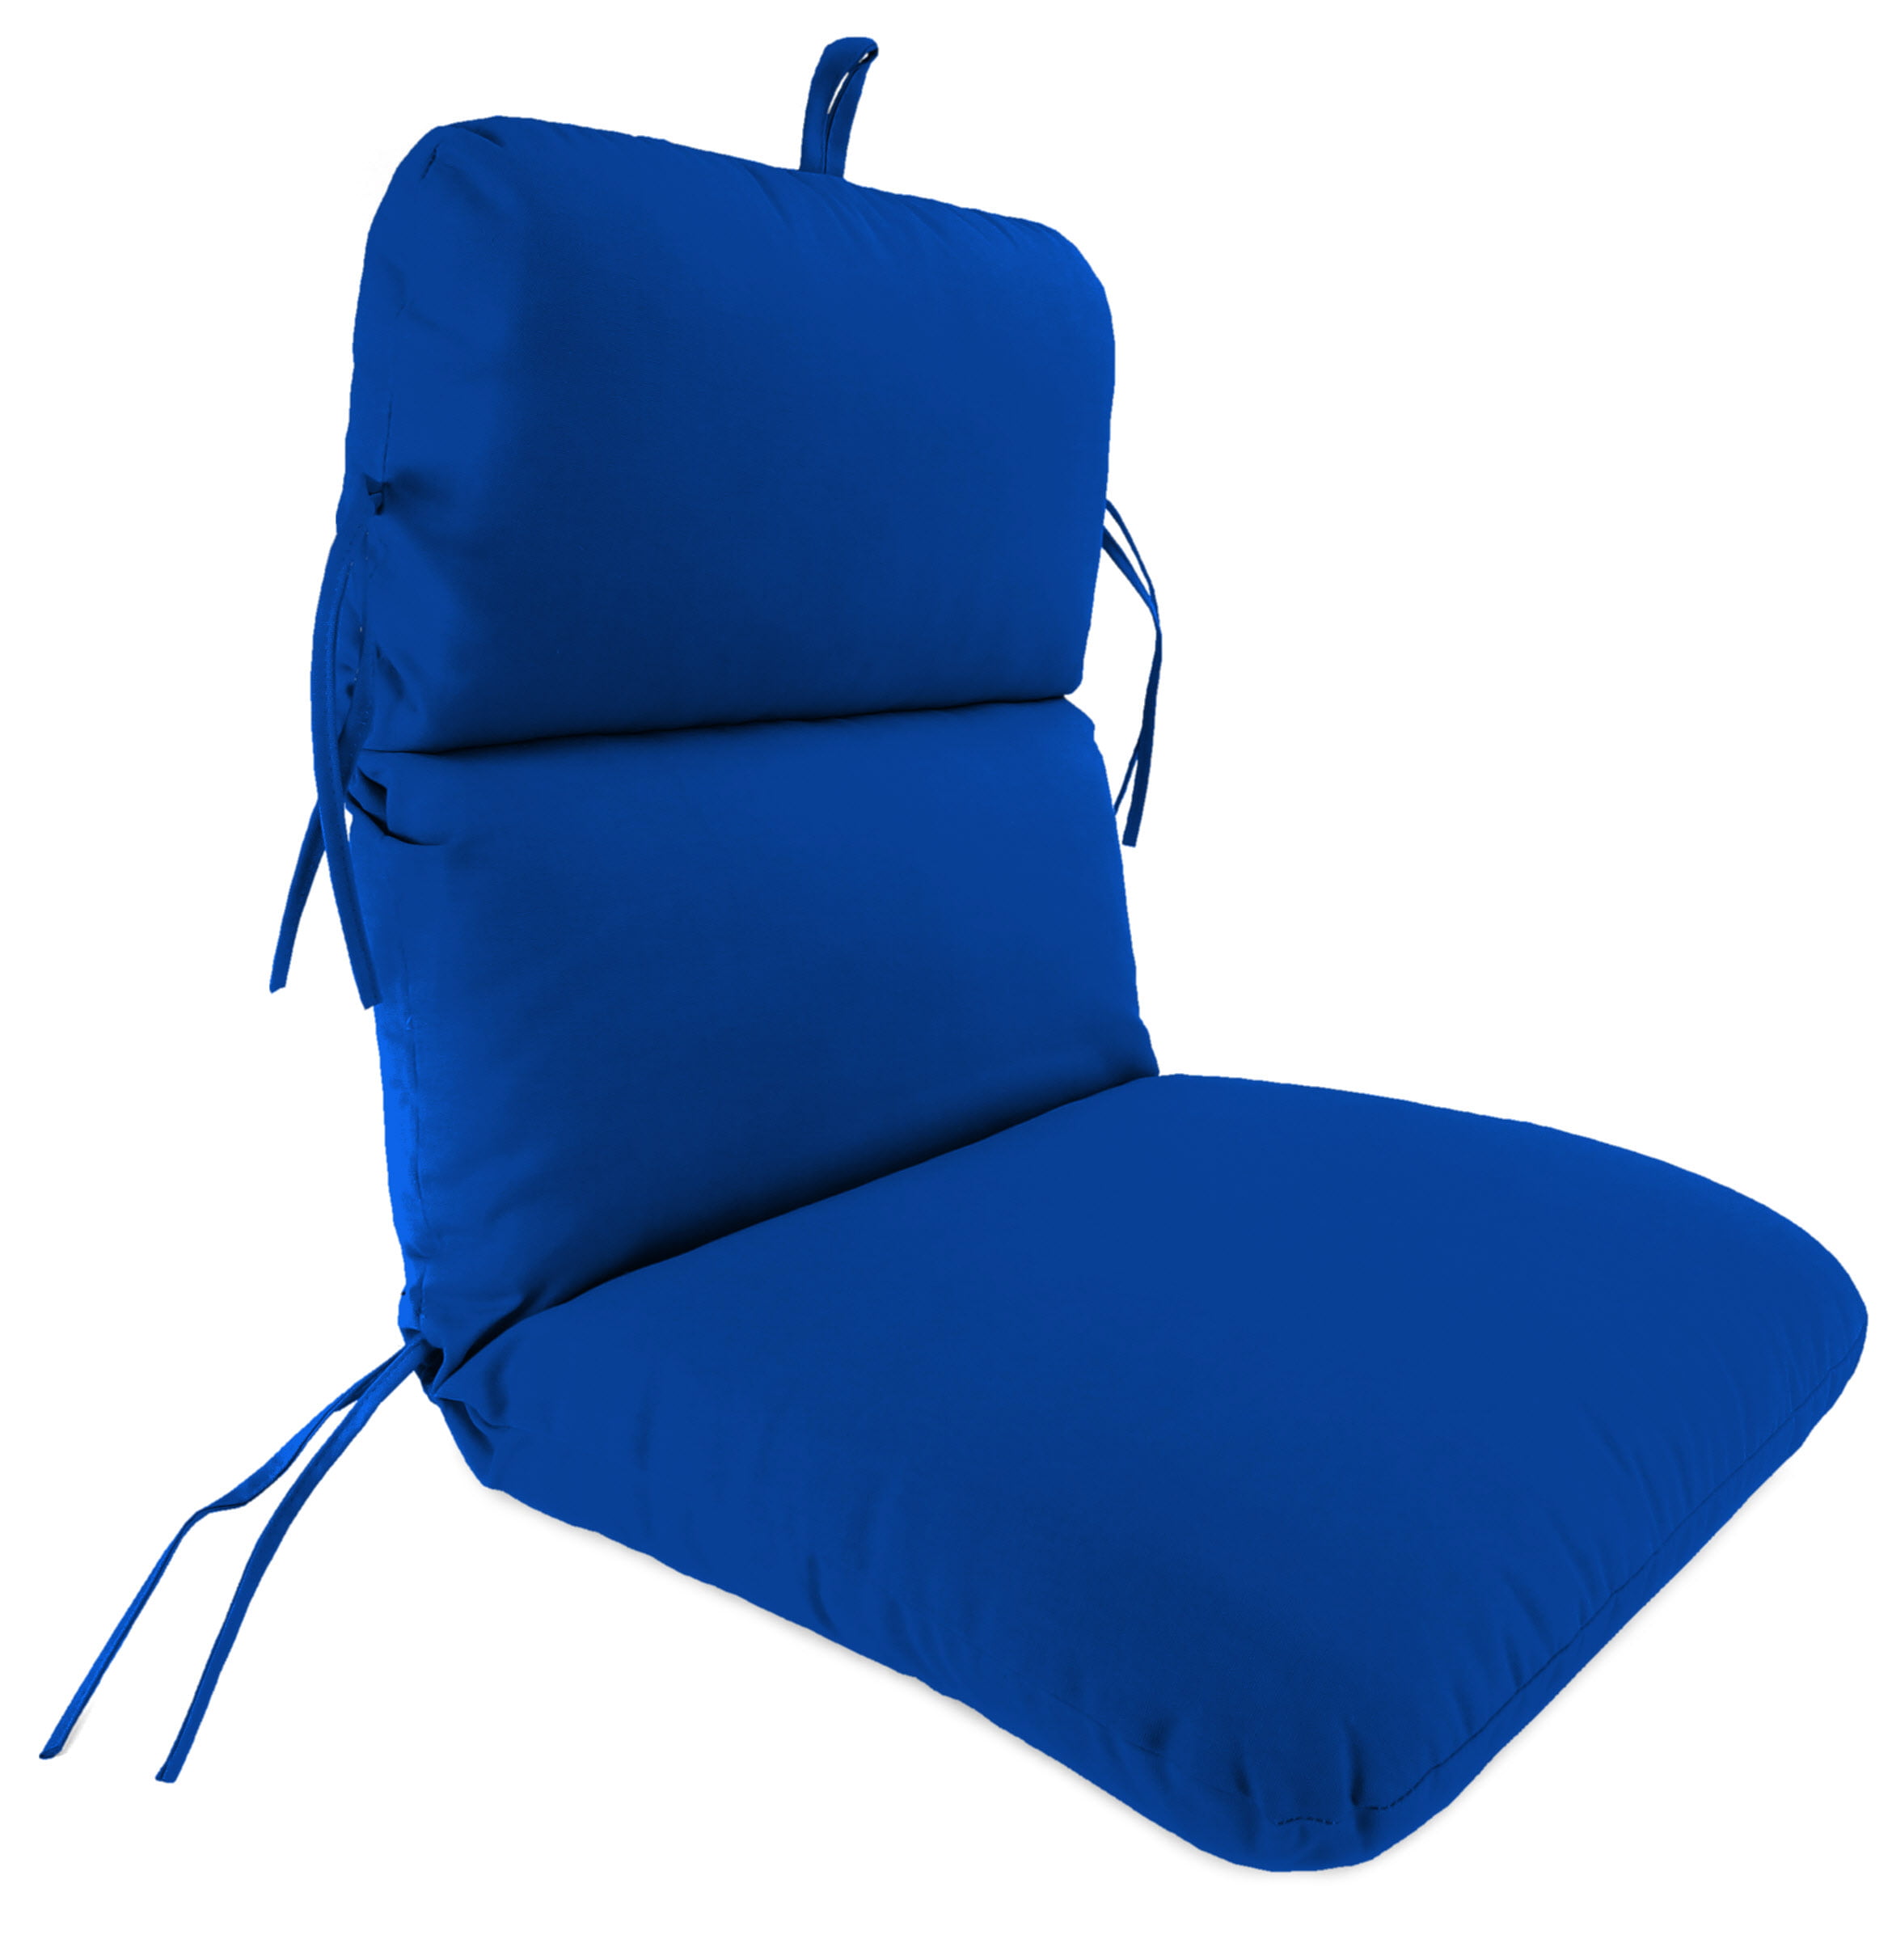 Outdoor Chair Cushion 22 x 45 x 5 by Comfort Classics Inc. 